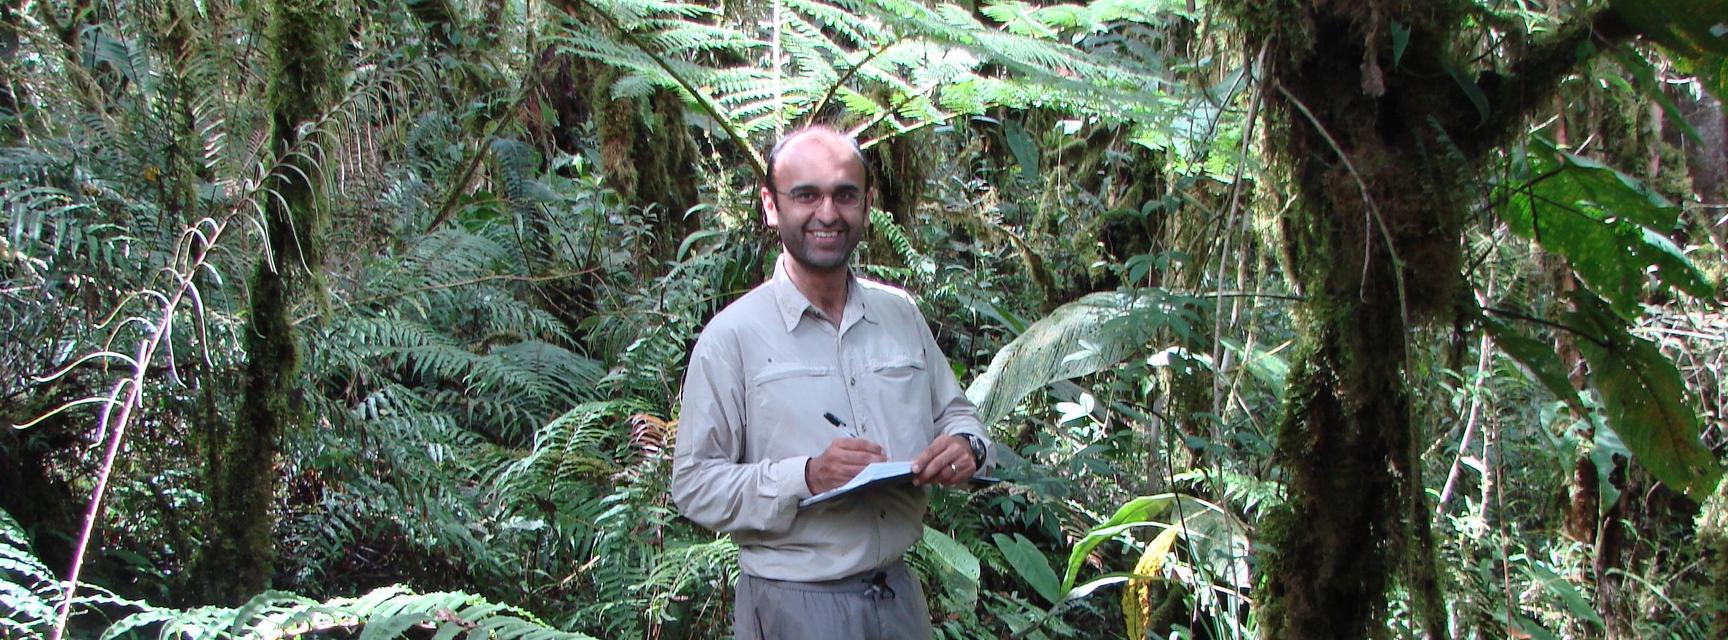 Professor Malhi conducting research in a forest